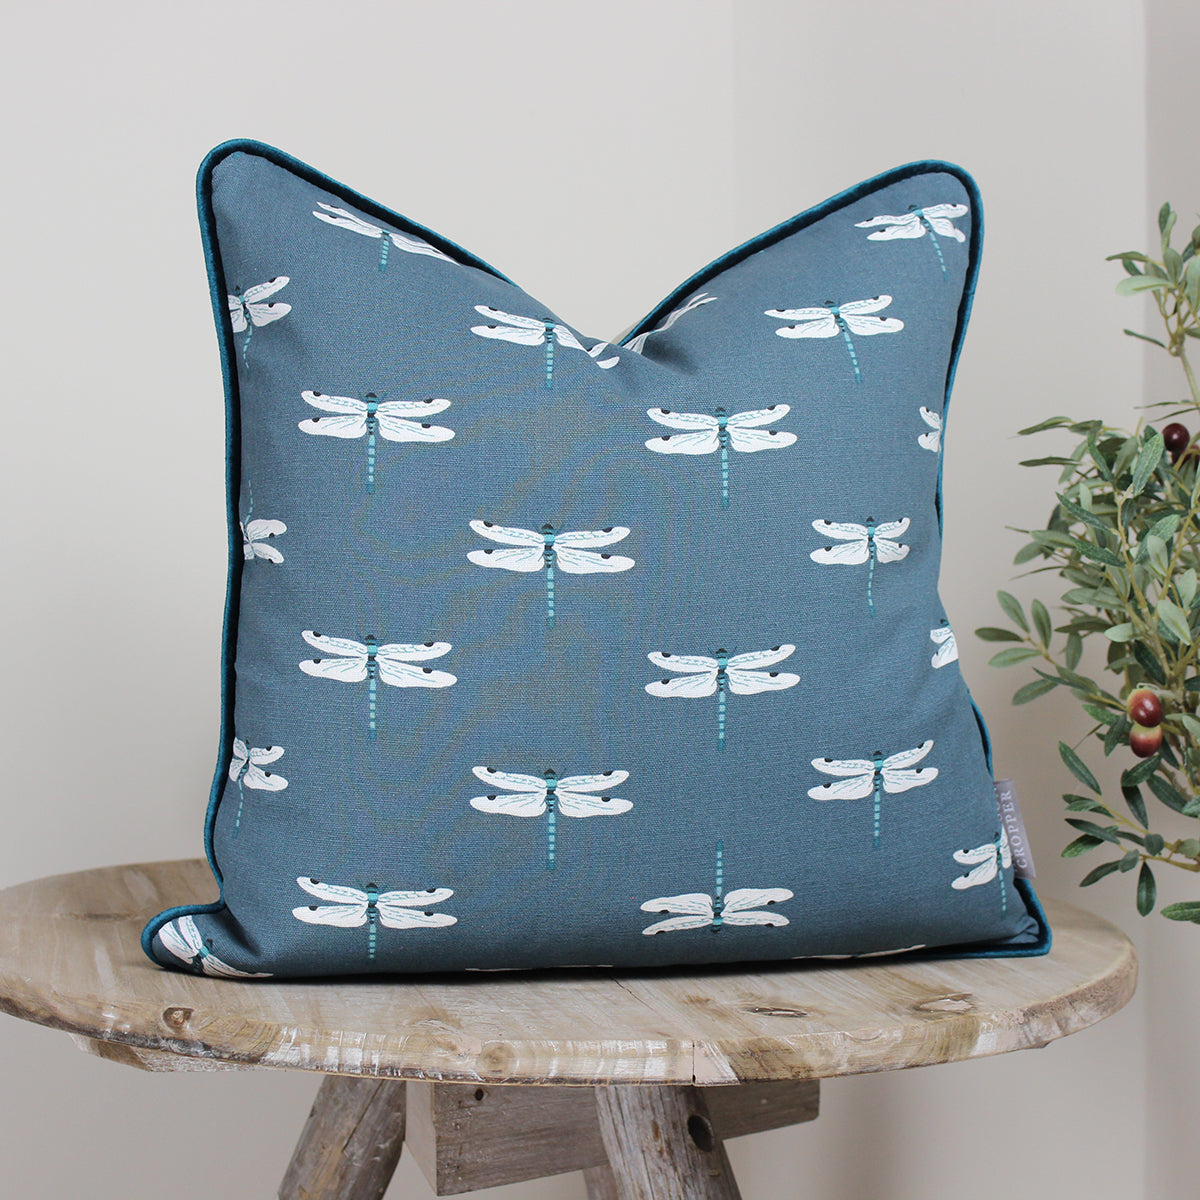 Dragonfly Sophie Allport Fabric Cushion